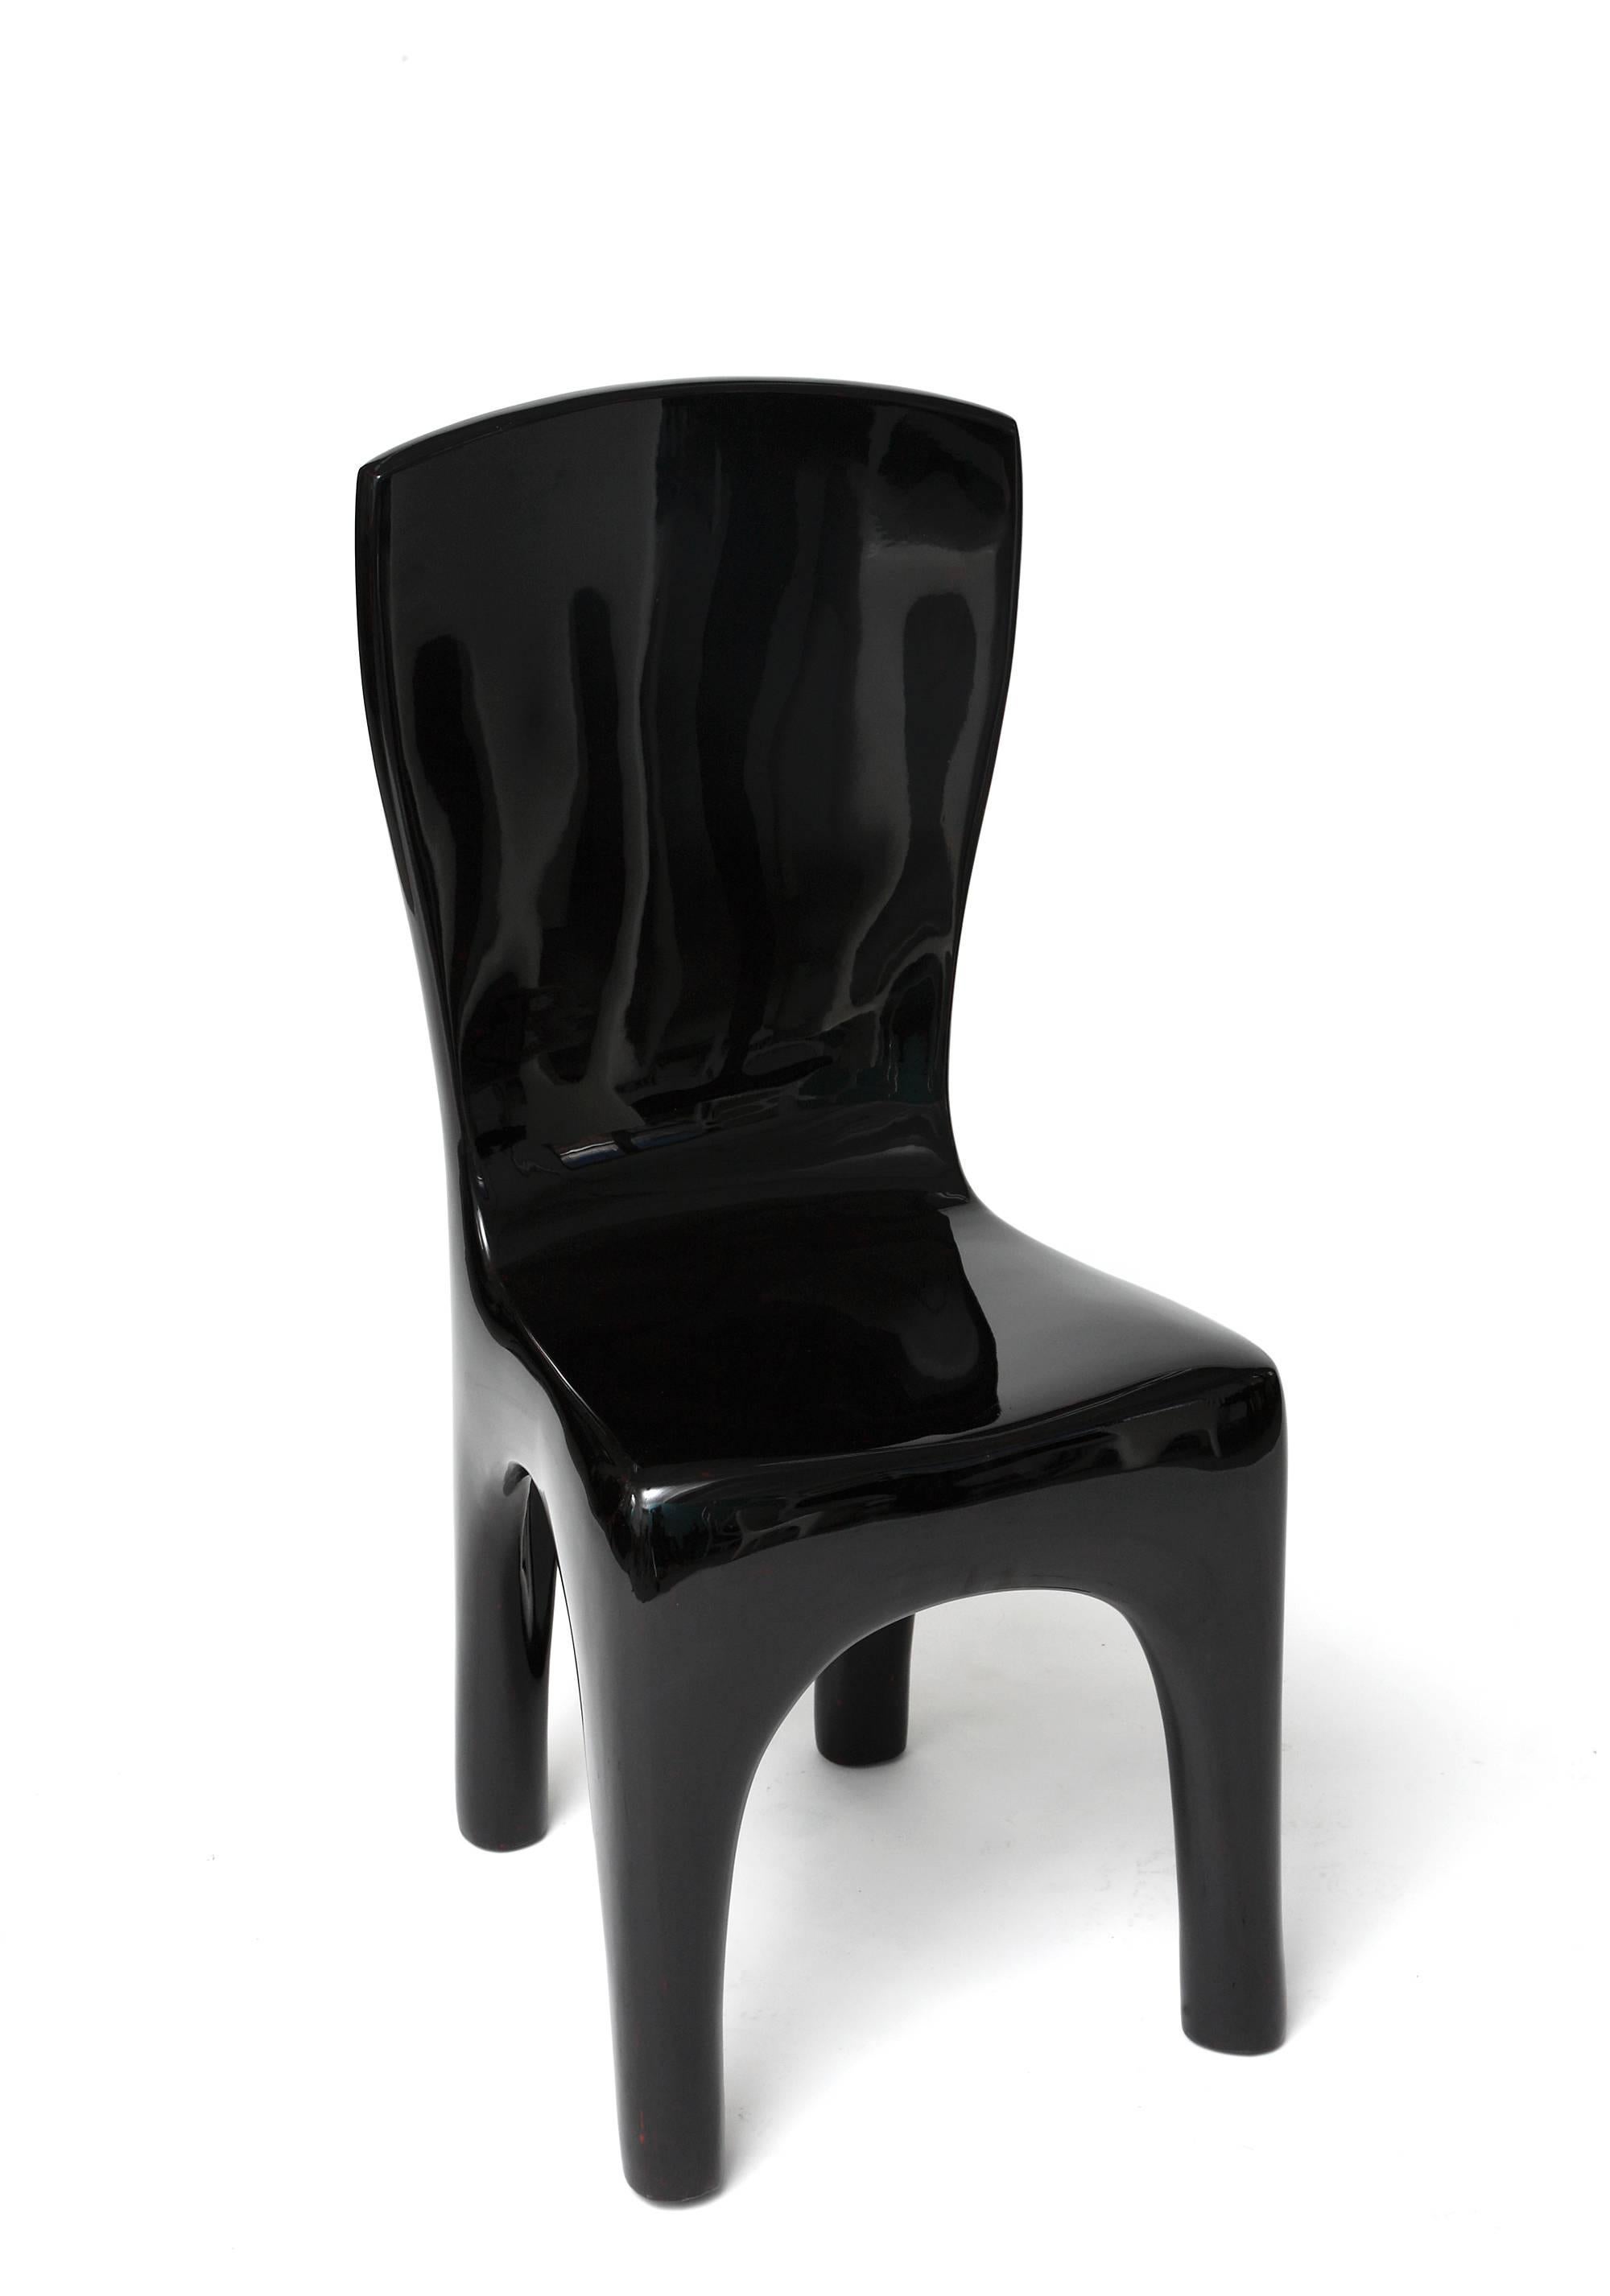 French Sculpted Dining Chairs in Black Lacquer by Jacques Jarrige, 2015